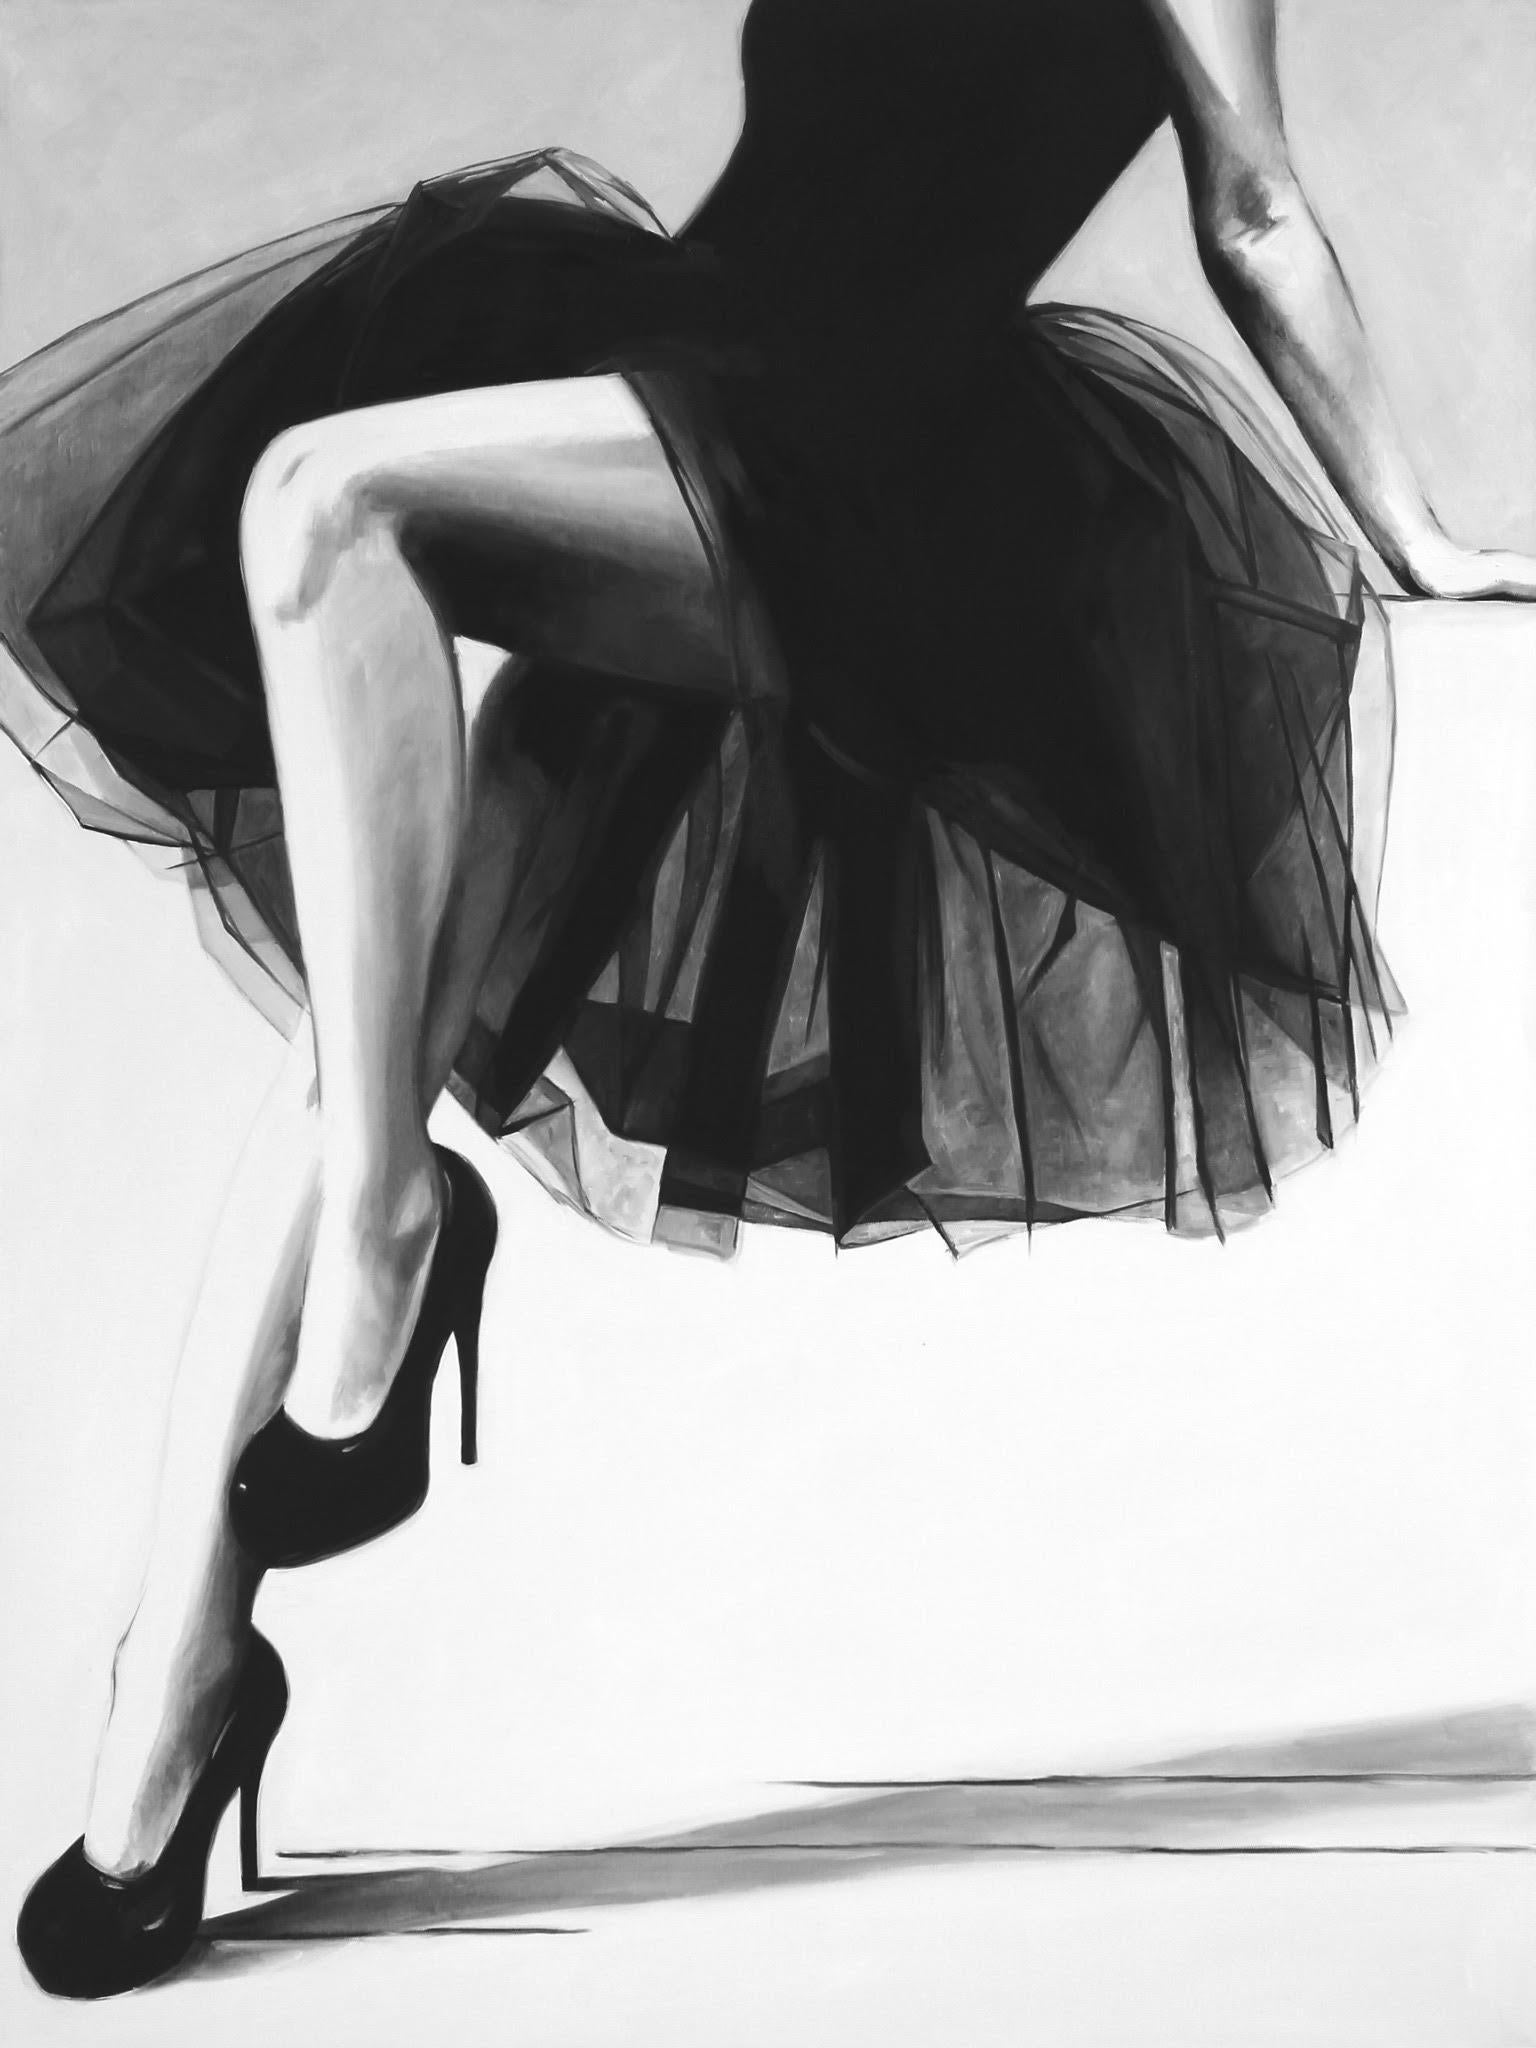 Cindy Press Figurative Painting - "Yes Please (Black)" black & white oil painting of a woman in a dress and heels 